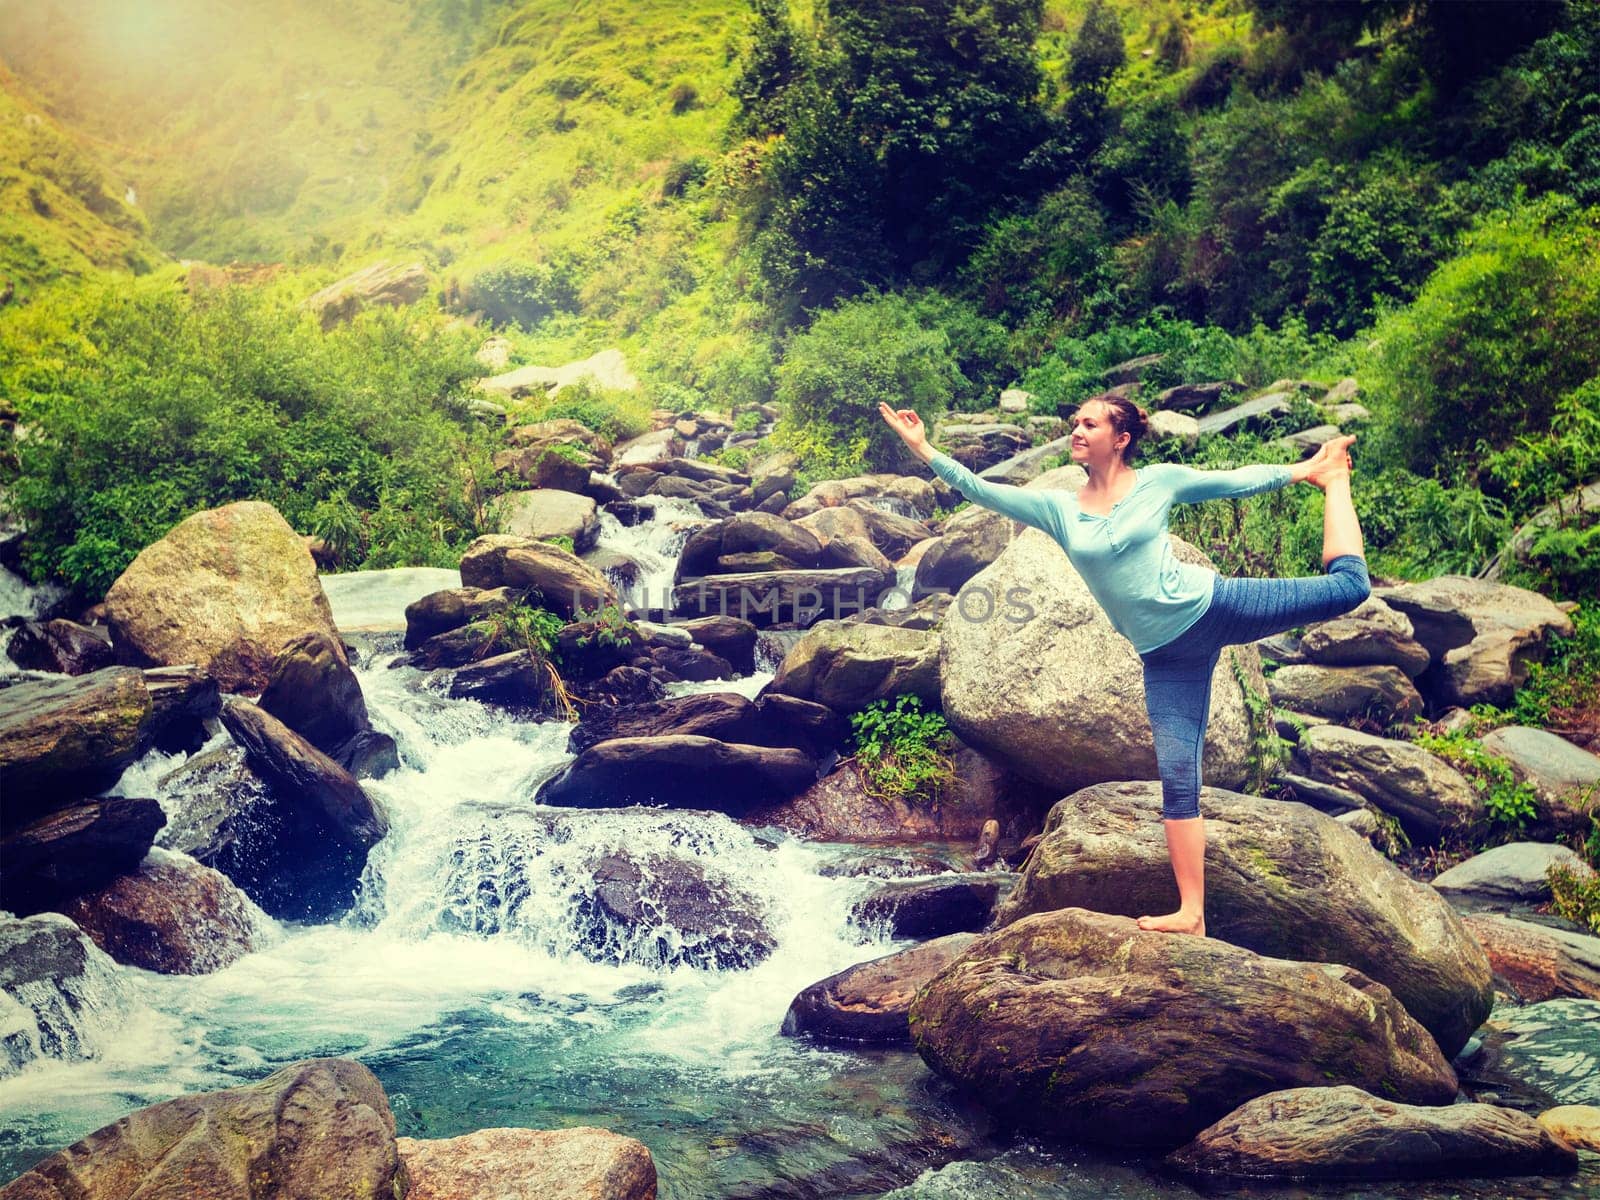 Yoga outdoors - woman doing yoga asana Natarajasana - Lord of the dance balance pose outdoors at waterfall in Himalayas. Vintage retro effect filtered hipster style image.